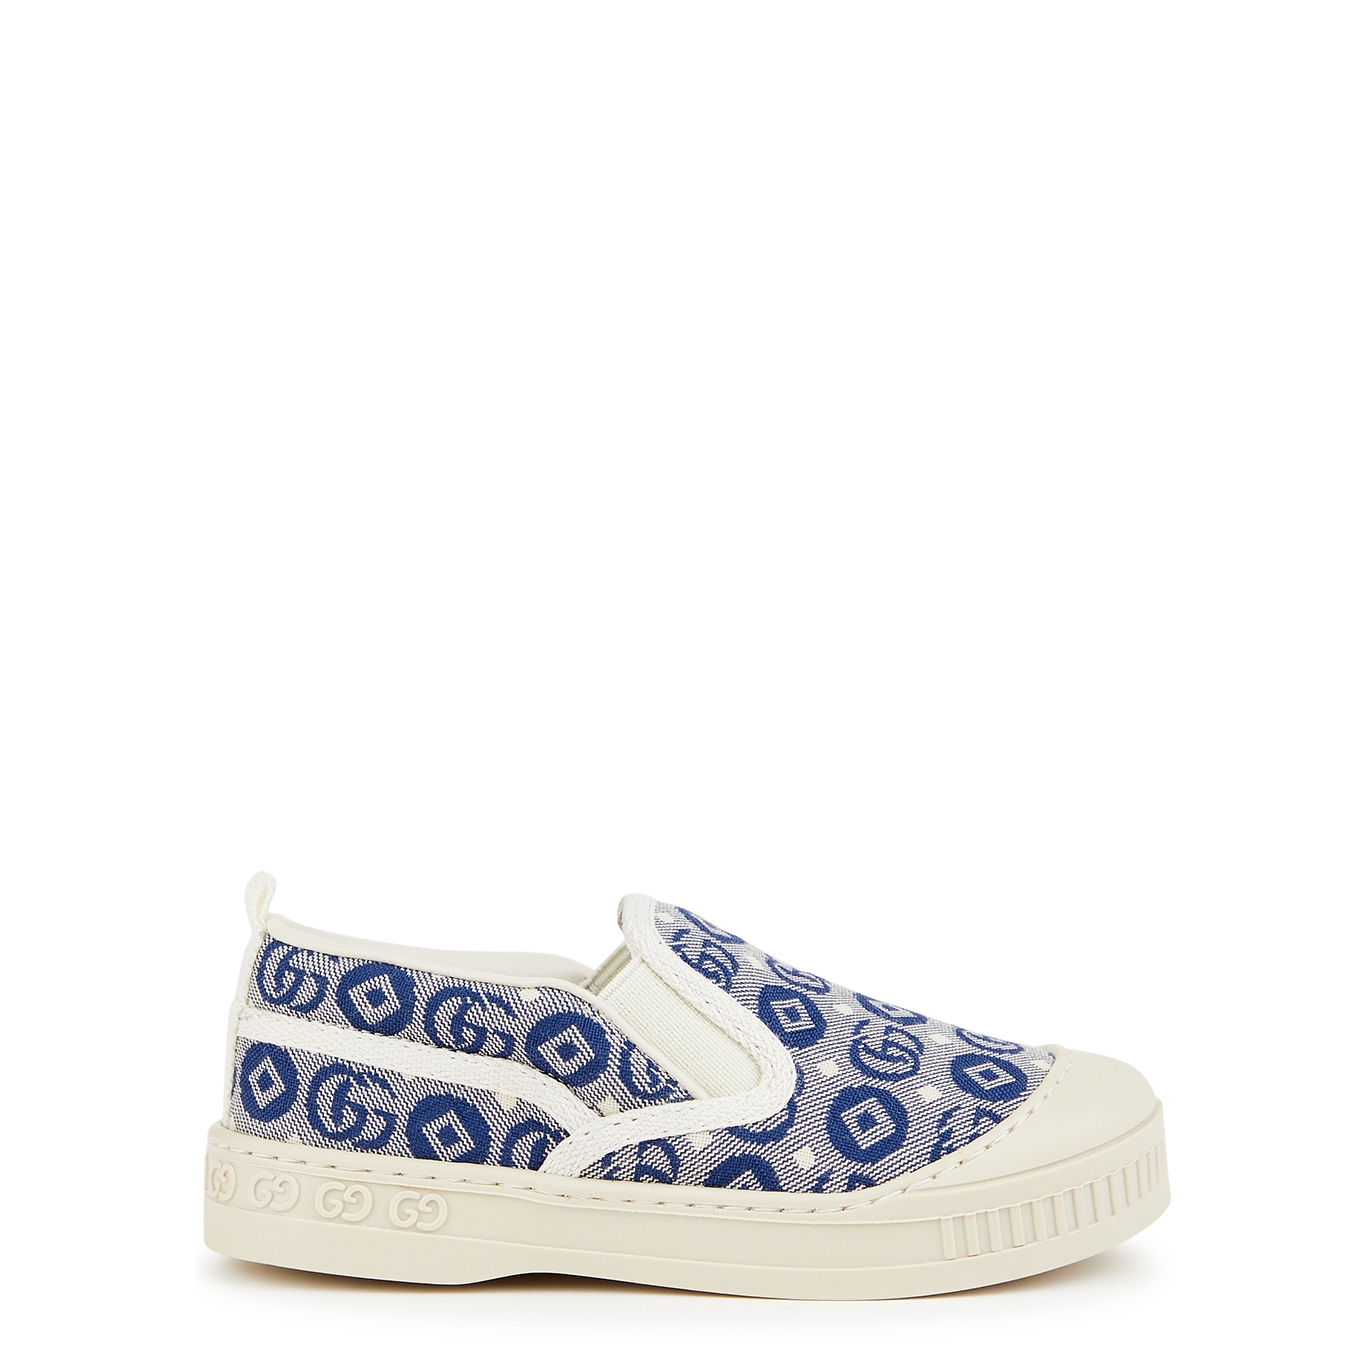 Gucci Kids Gucci Tennis 1977 Monogrammed Canvas Sneakers (IT20-IT26) - Multicoloured - 4 Baby